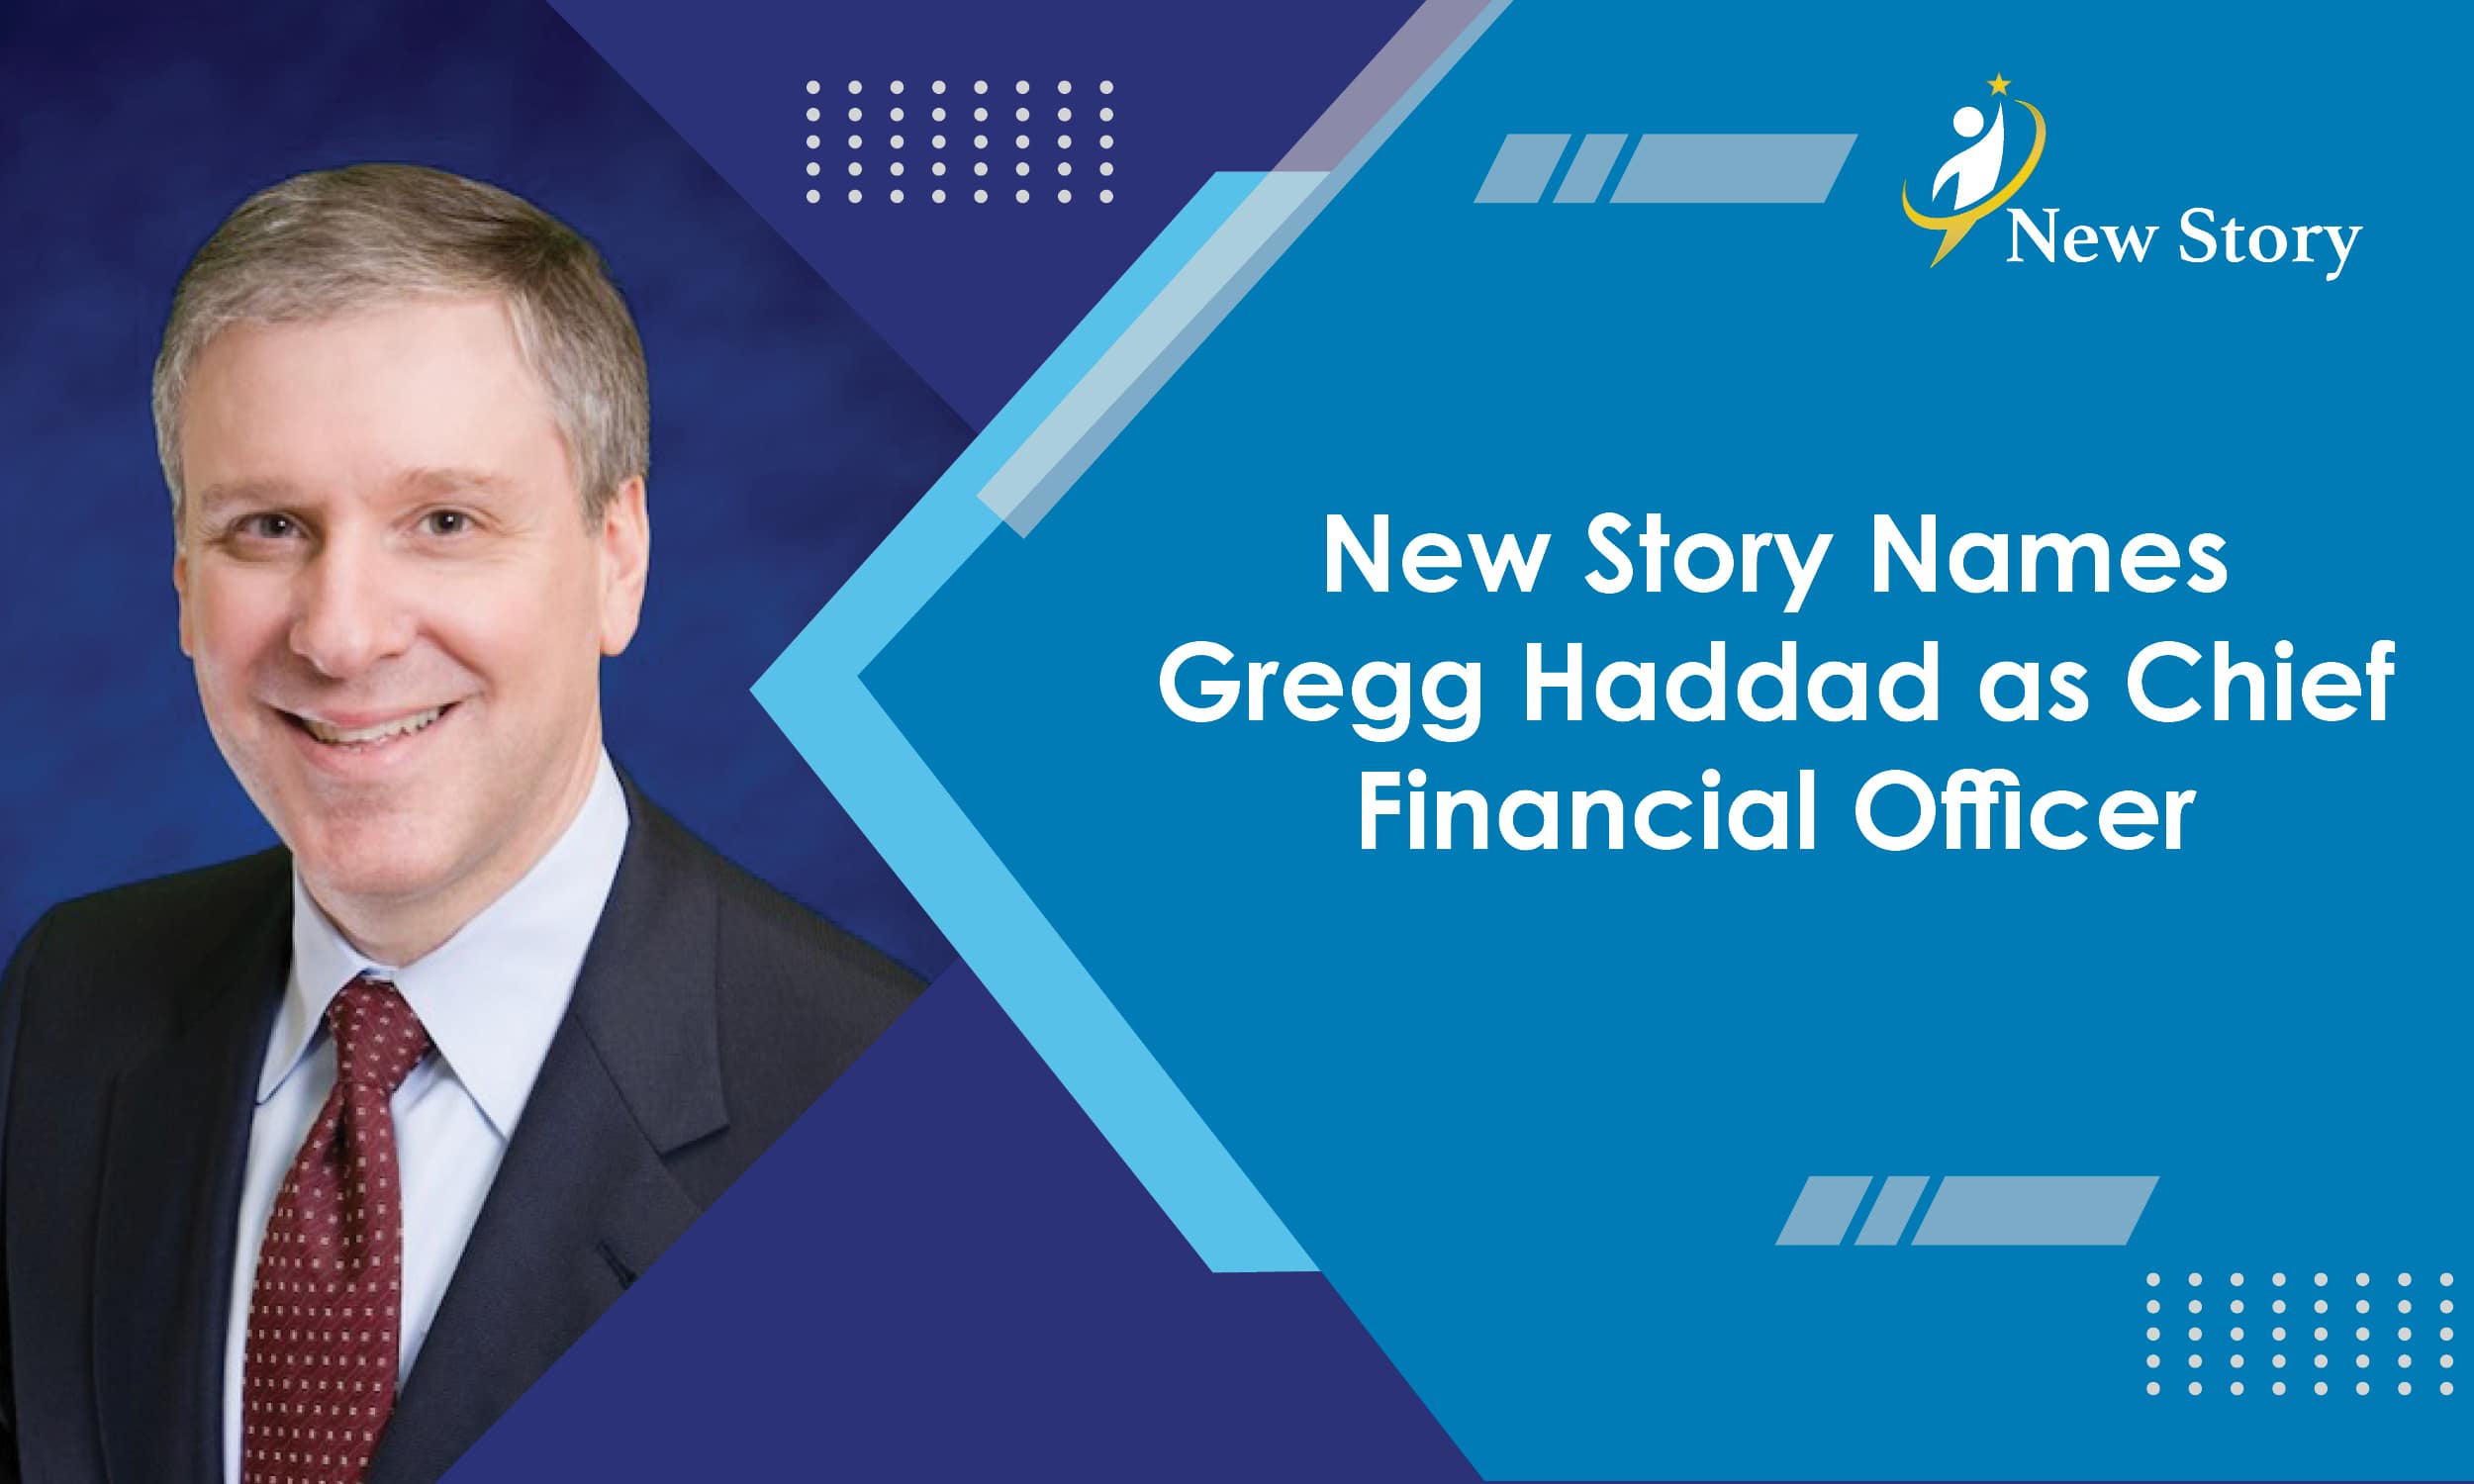 New Story Names Gregg Haddad as Chief Financial Officer